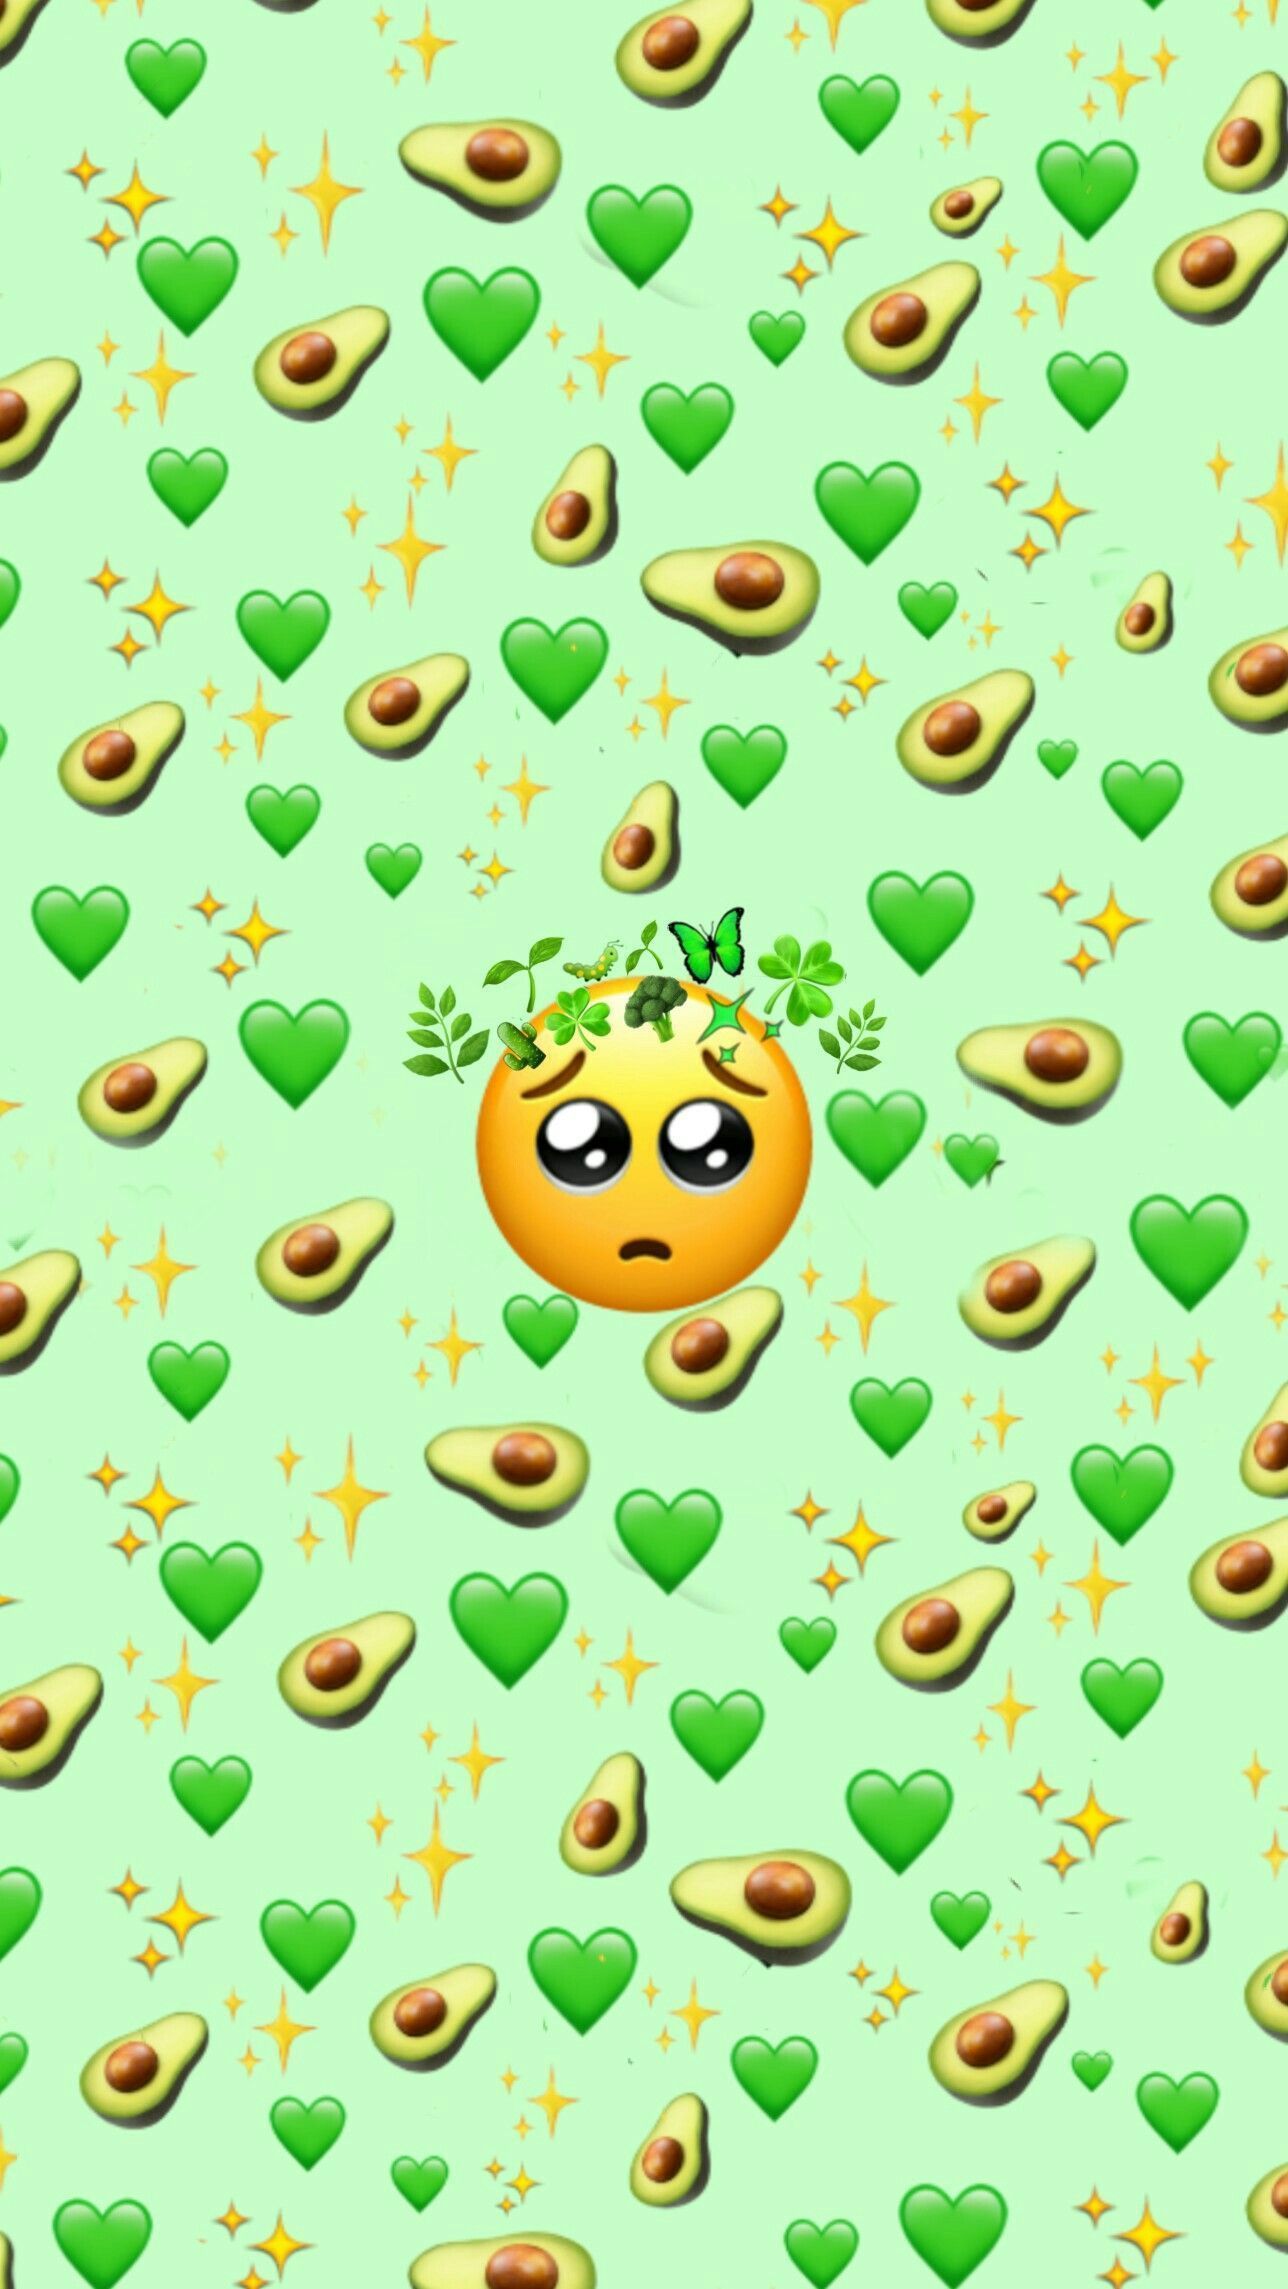 A green background with avocado and heart emojis - Emoji